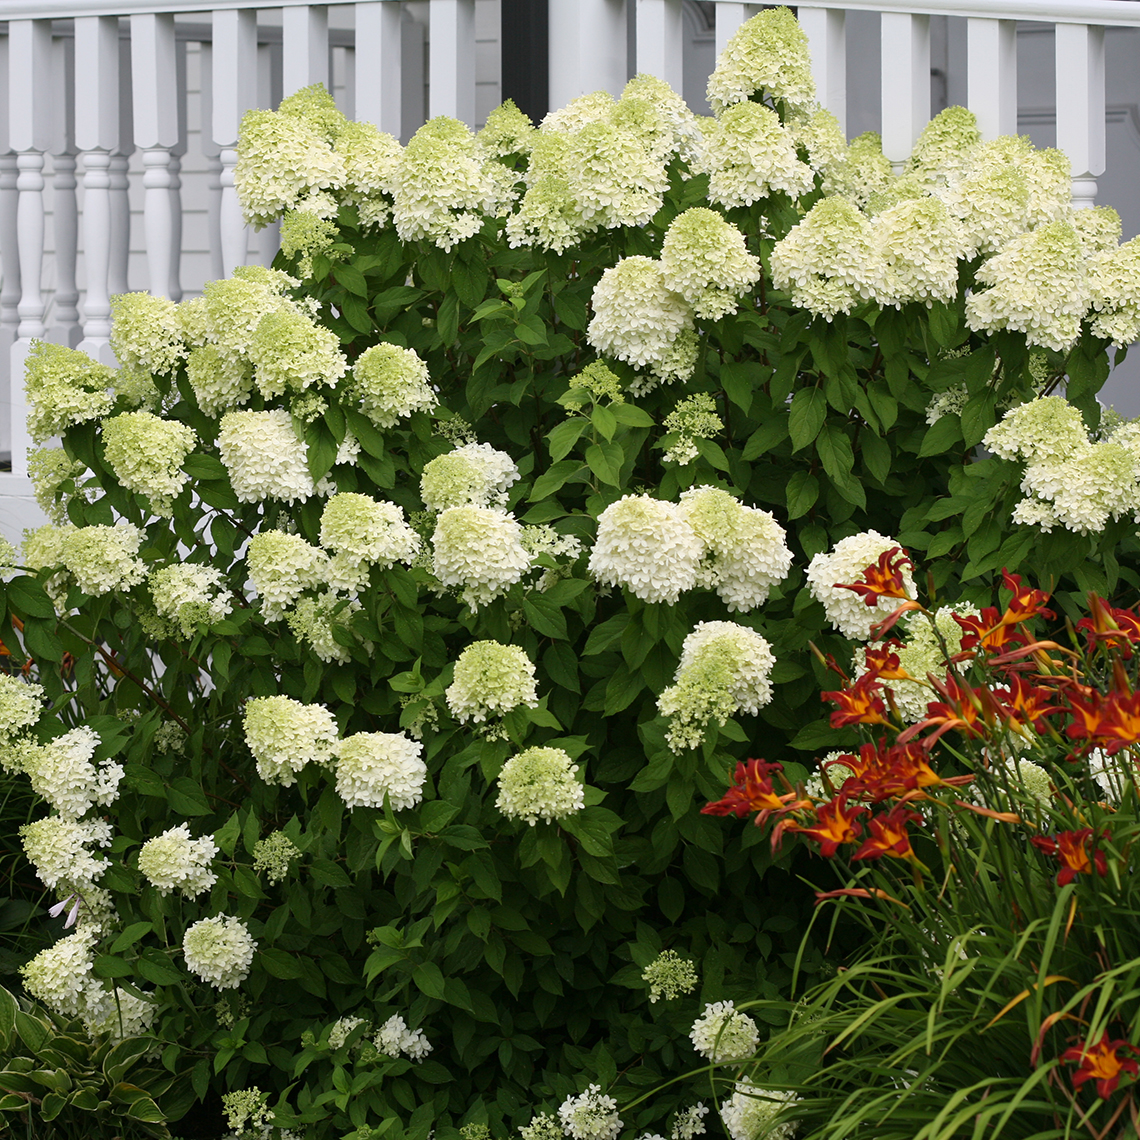 A Limelight hydrangea blooming in front of a white raiiling with a red daylily to its right